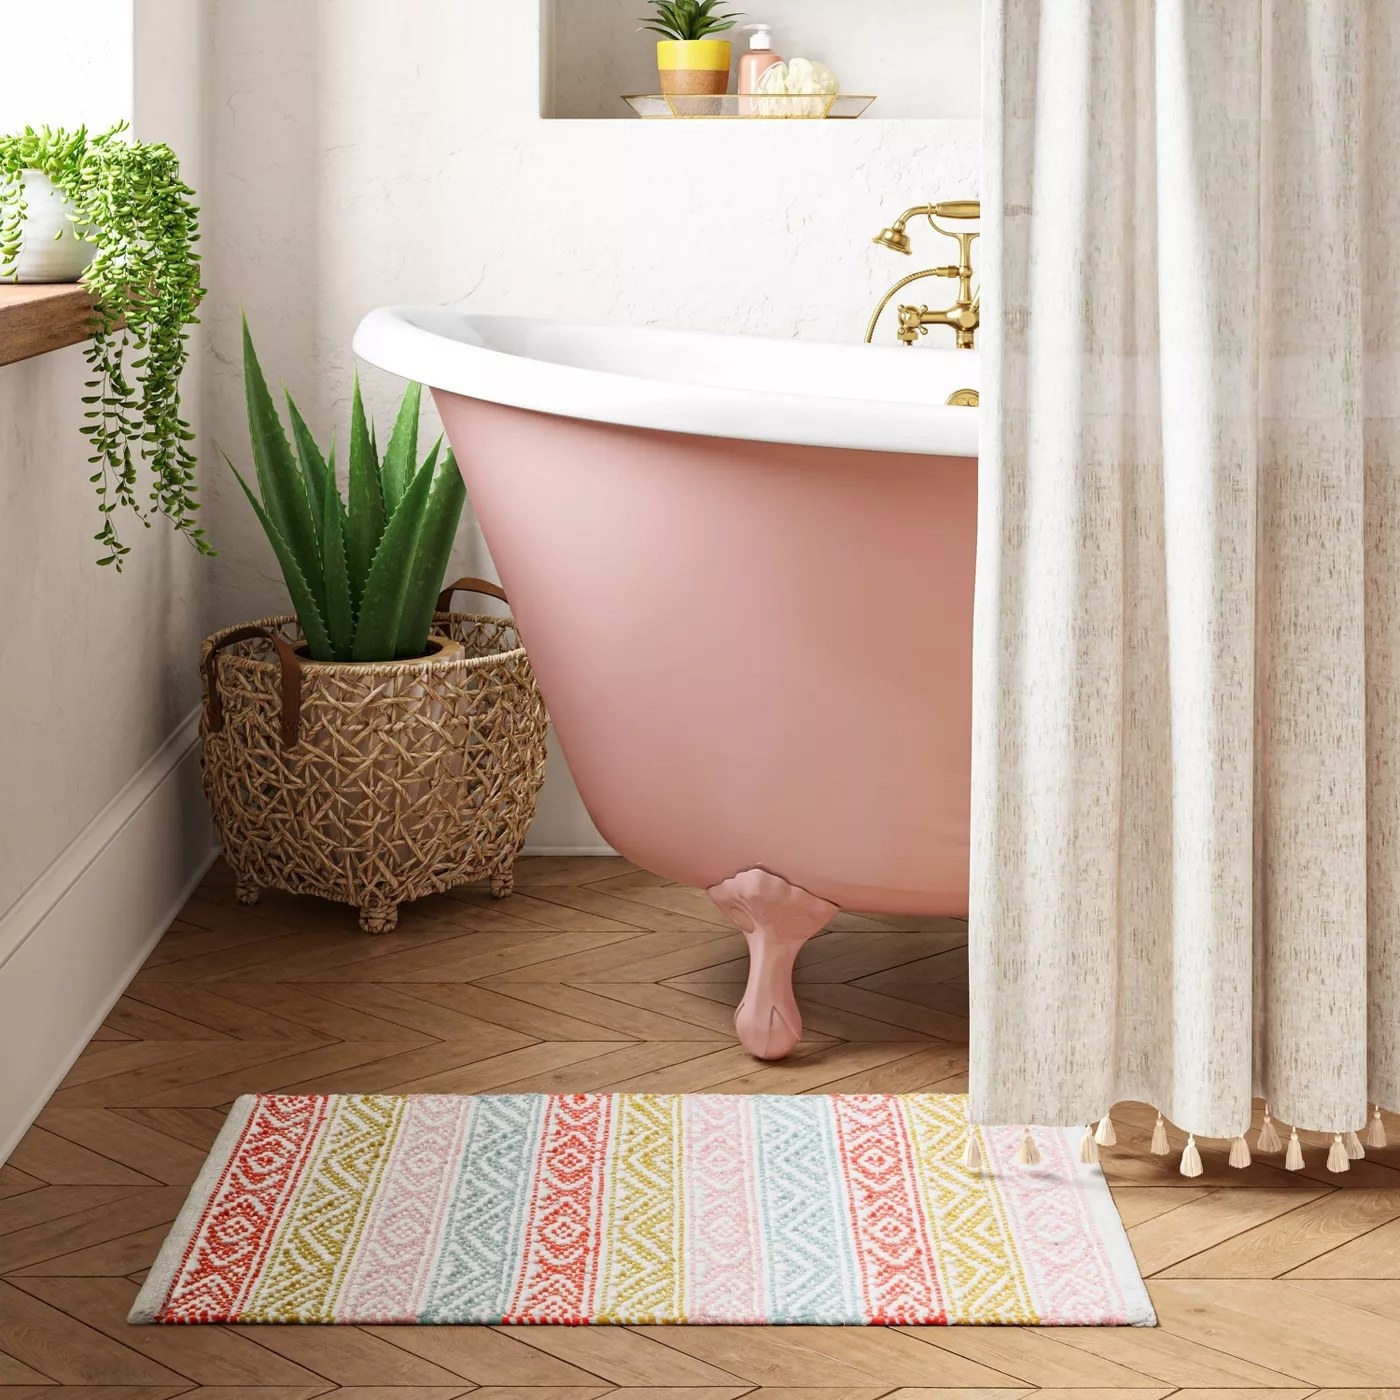 The red, green, pink, and blue striped bath rug in front of a bathroom